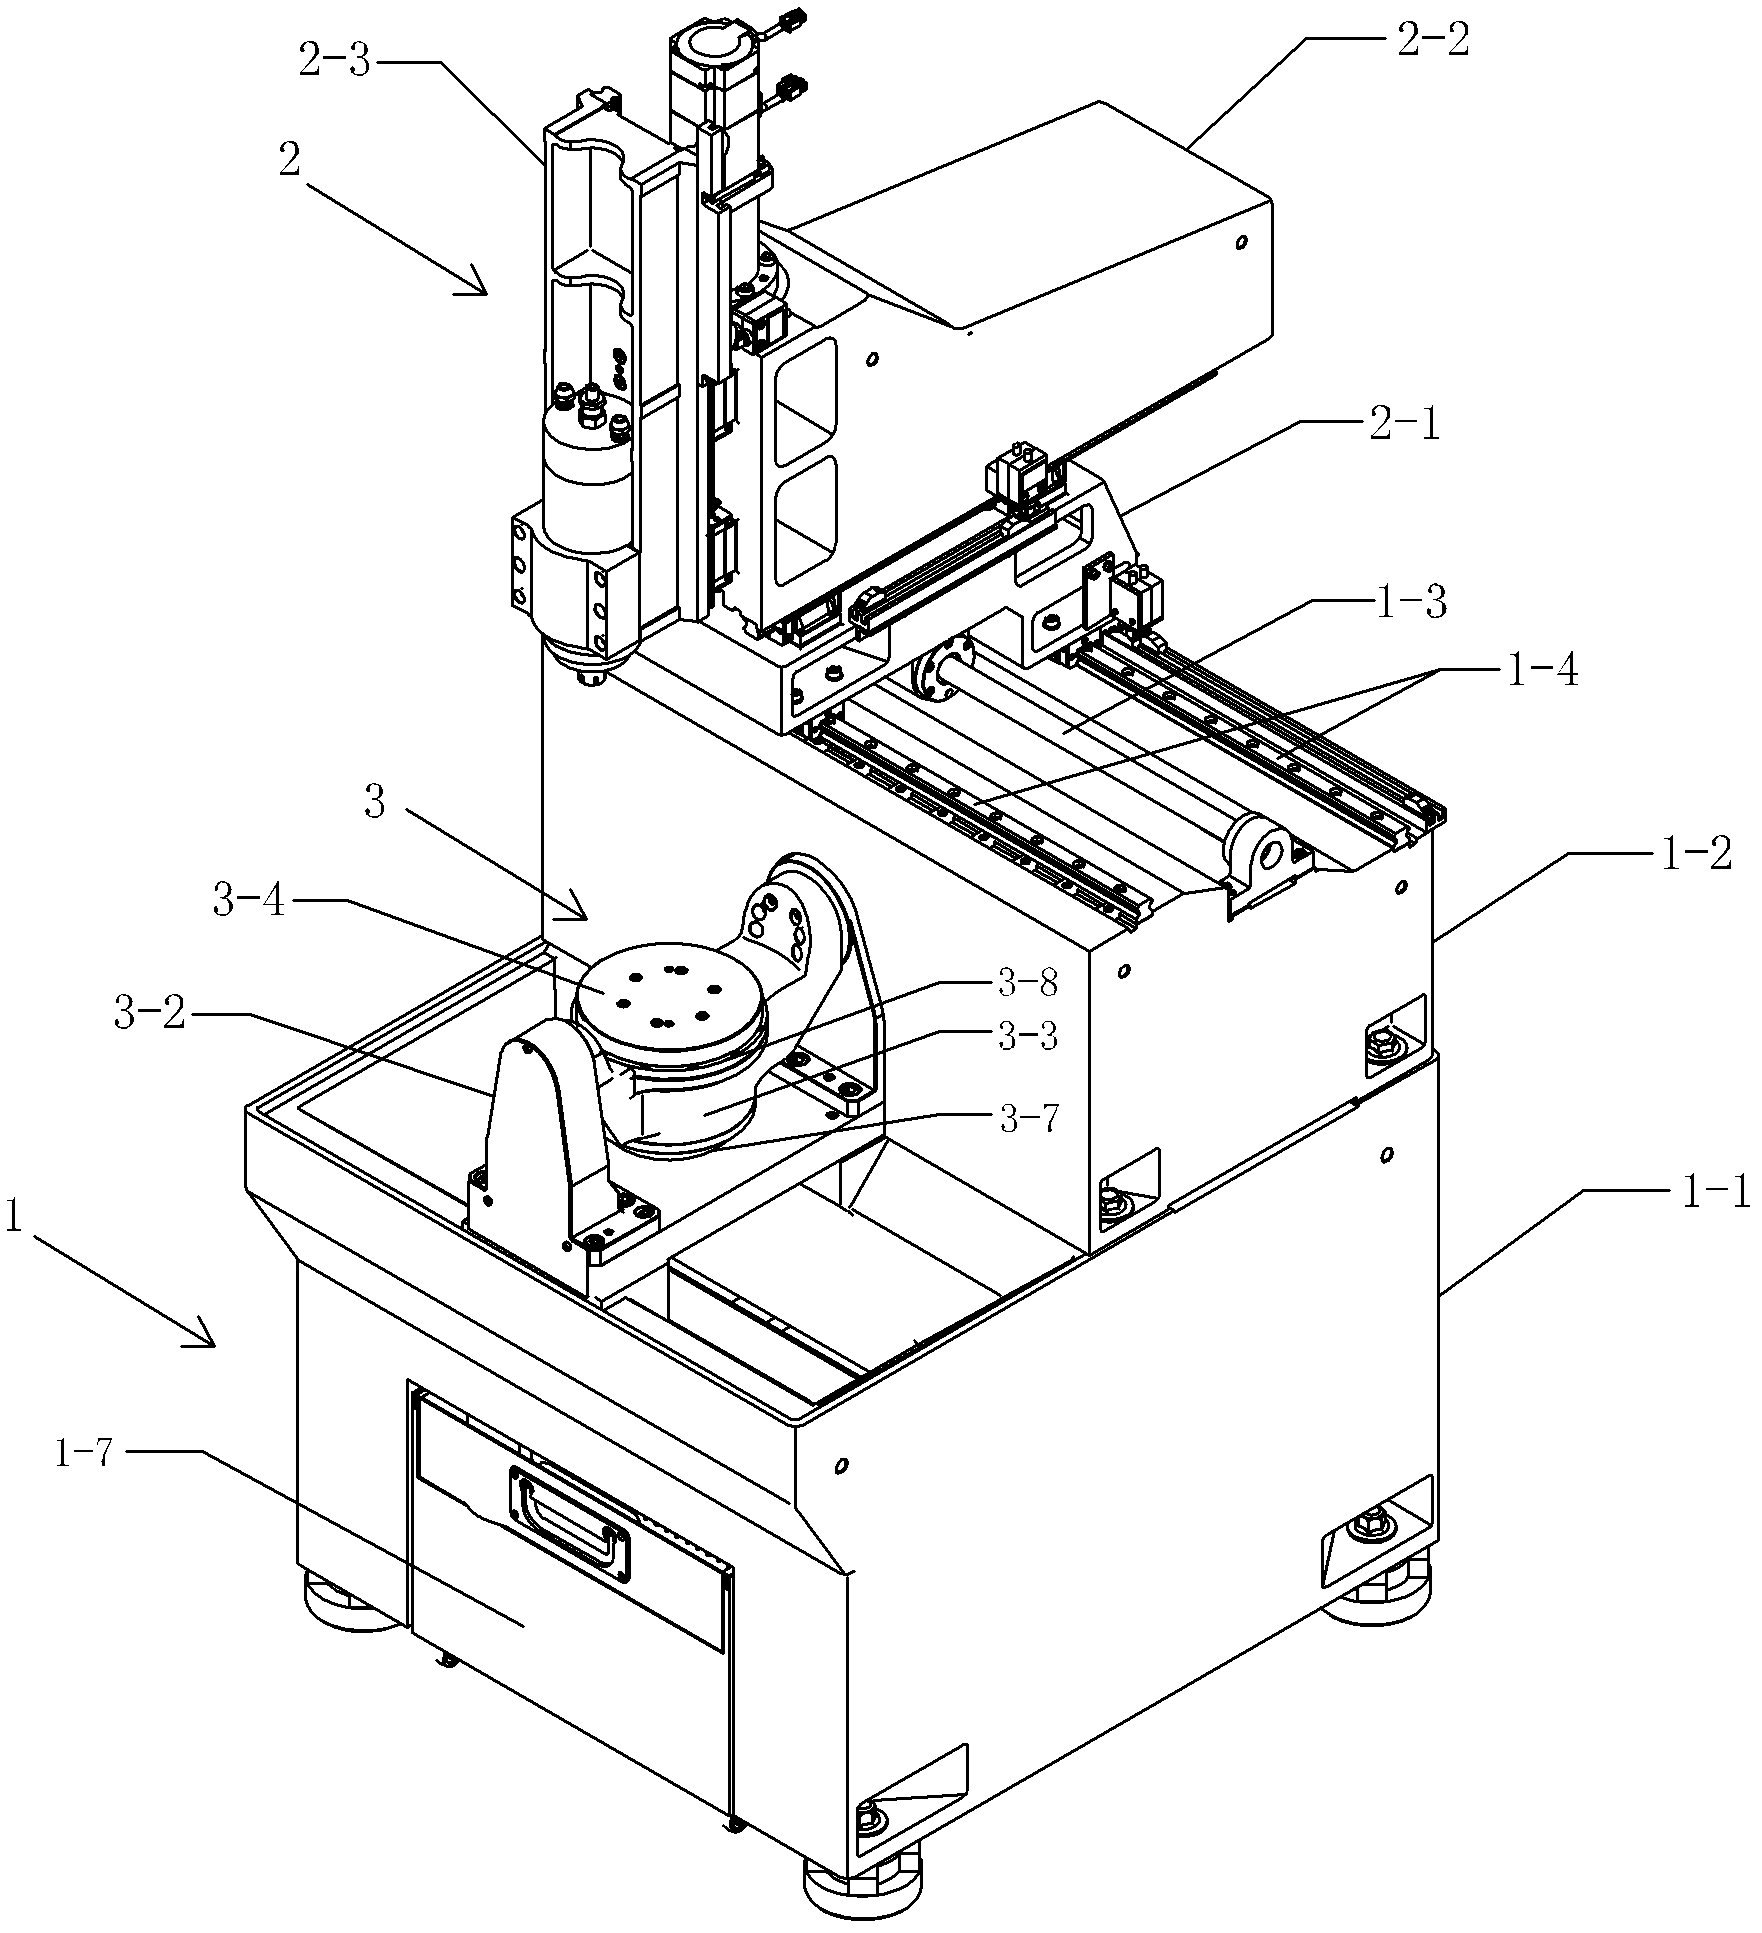 Small-sized five-axis machining center